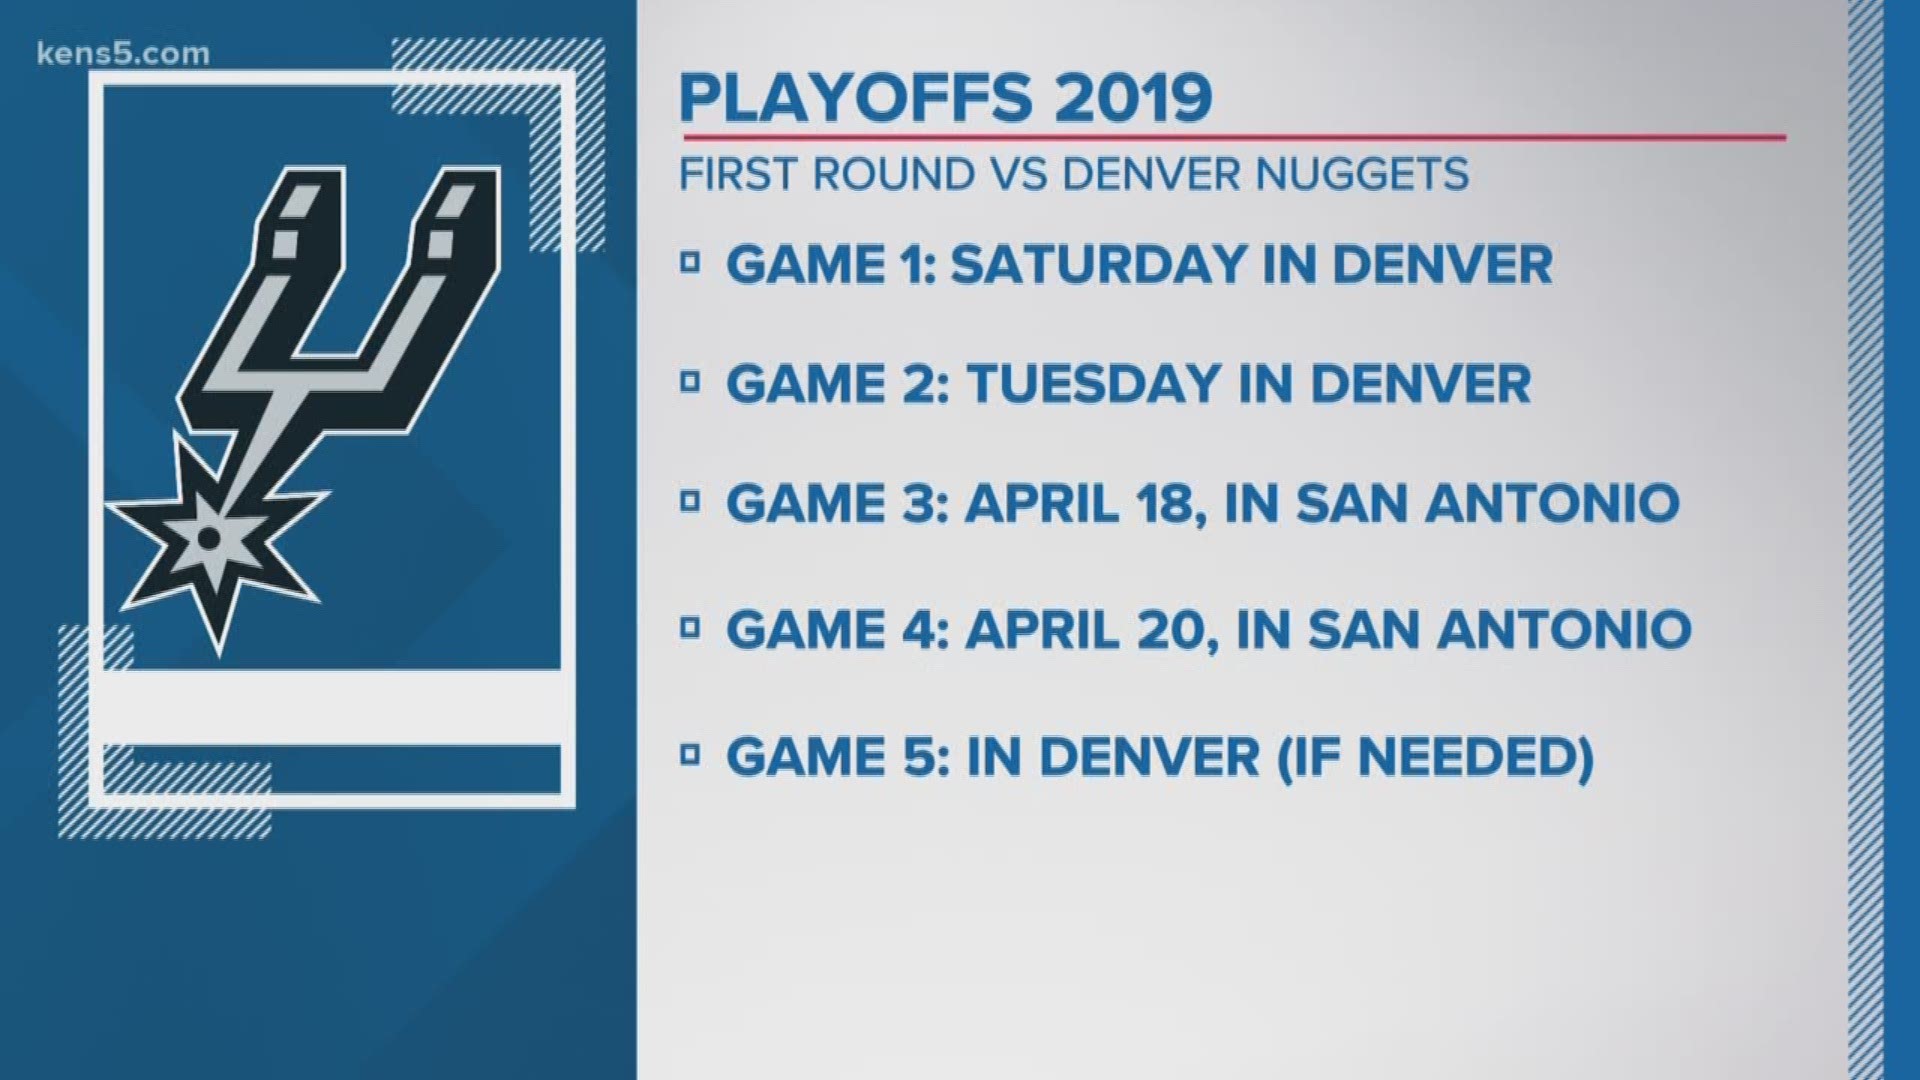 The Spurs clinched a spot in the first round of the NBA playoffs, where they will face the Denver Nuggets.